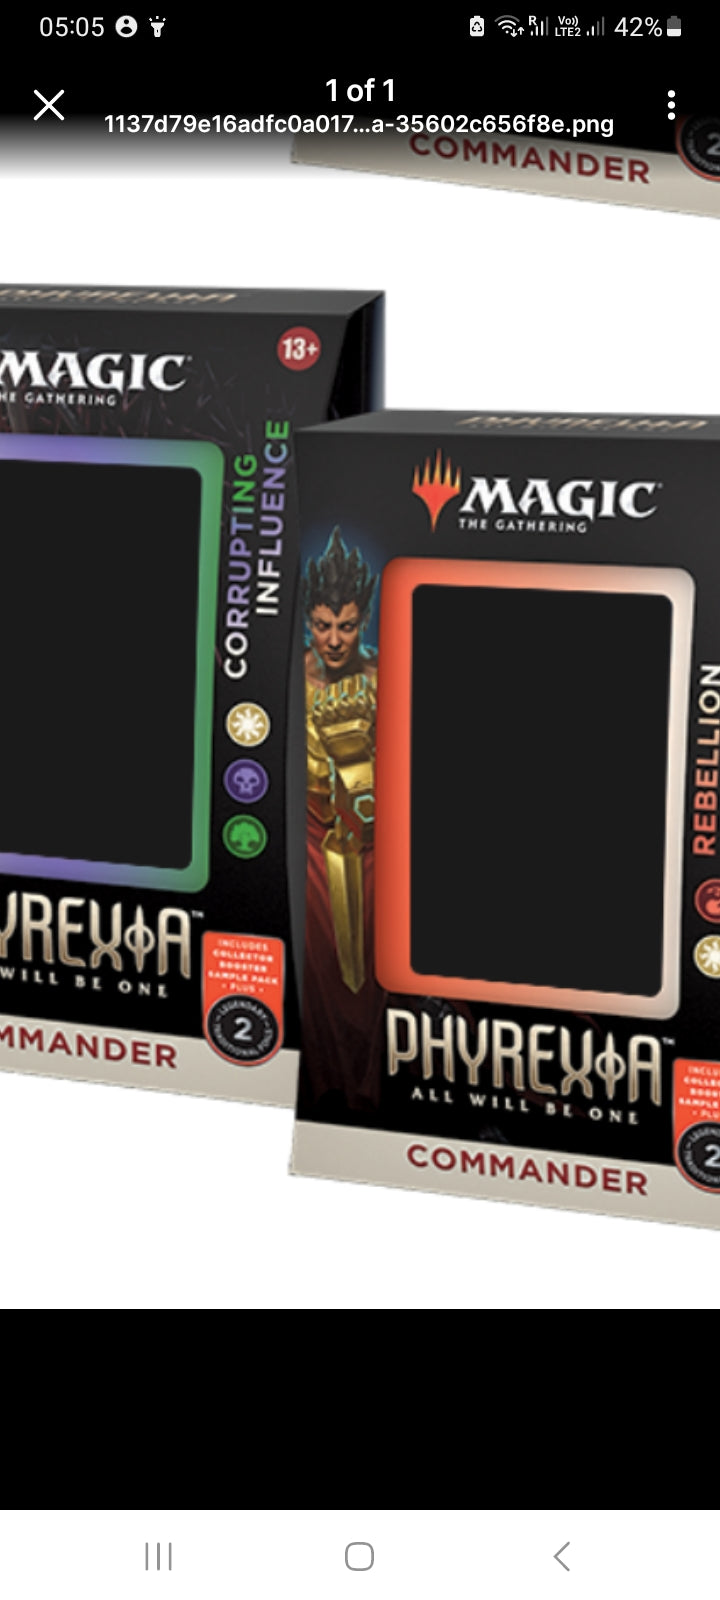 Phyrexia: All Will Be One - Commander Deck Display | Shuffle n Cut Hobbies & Games